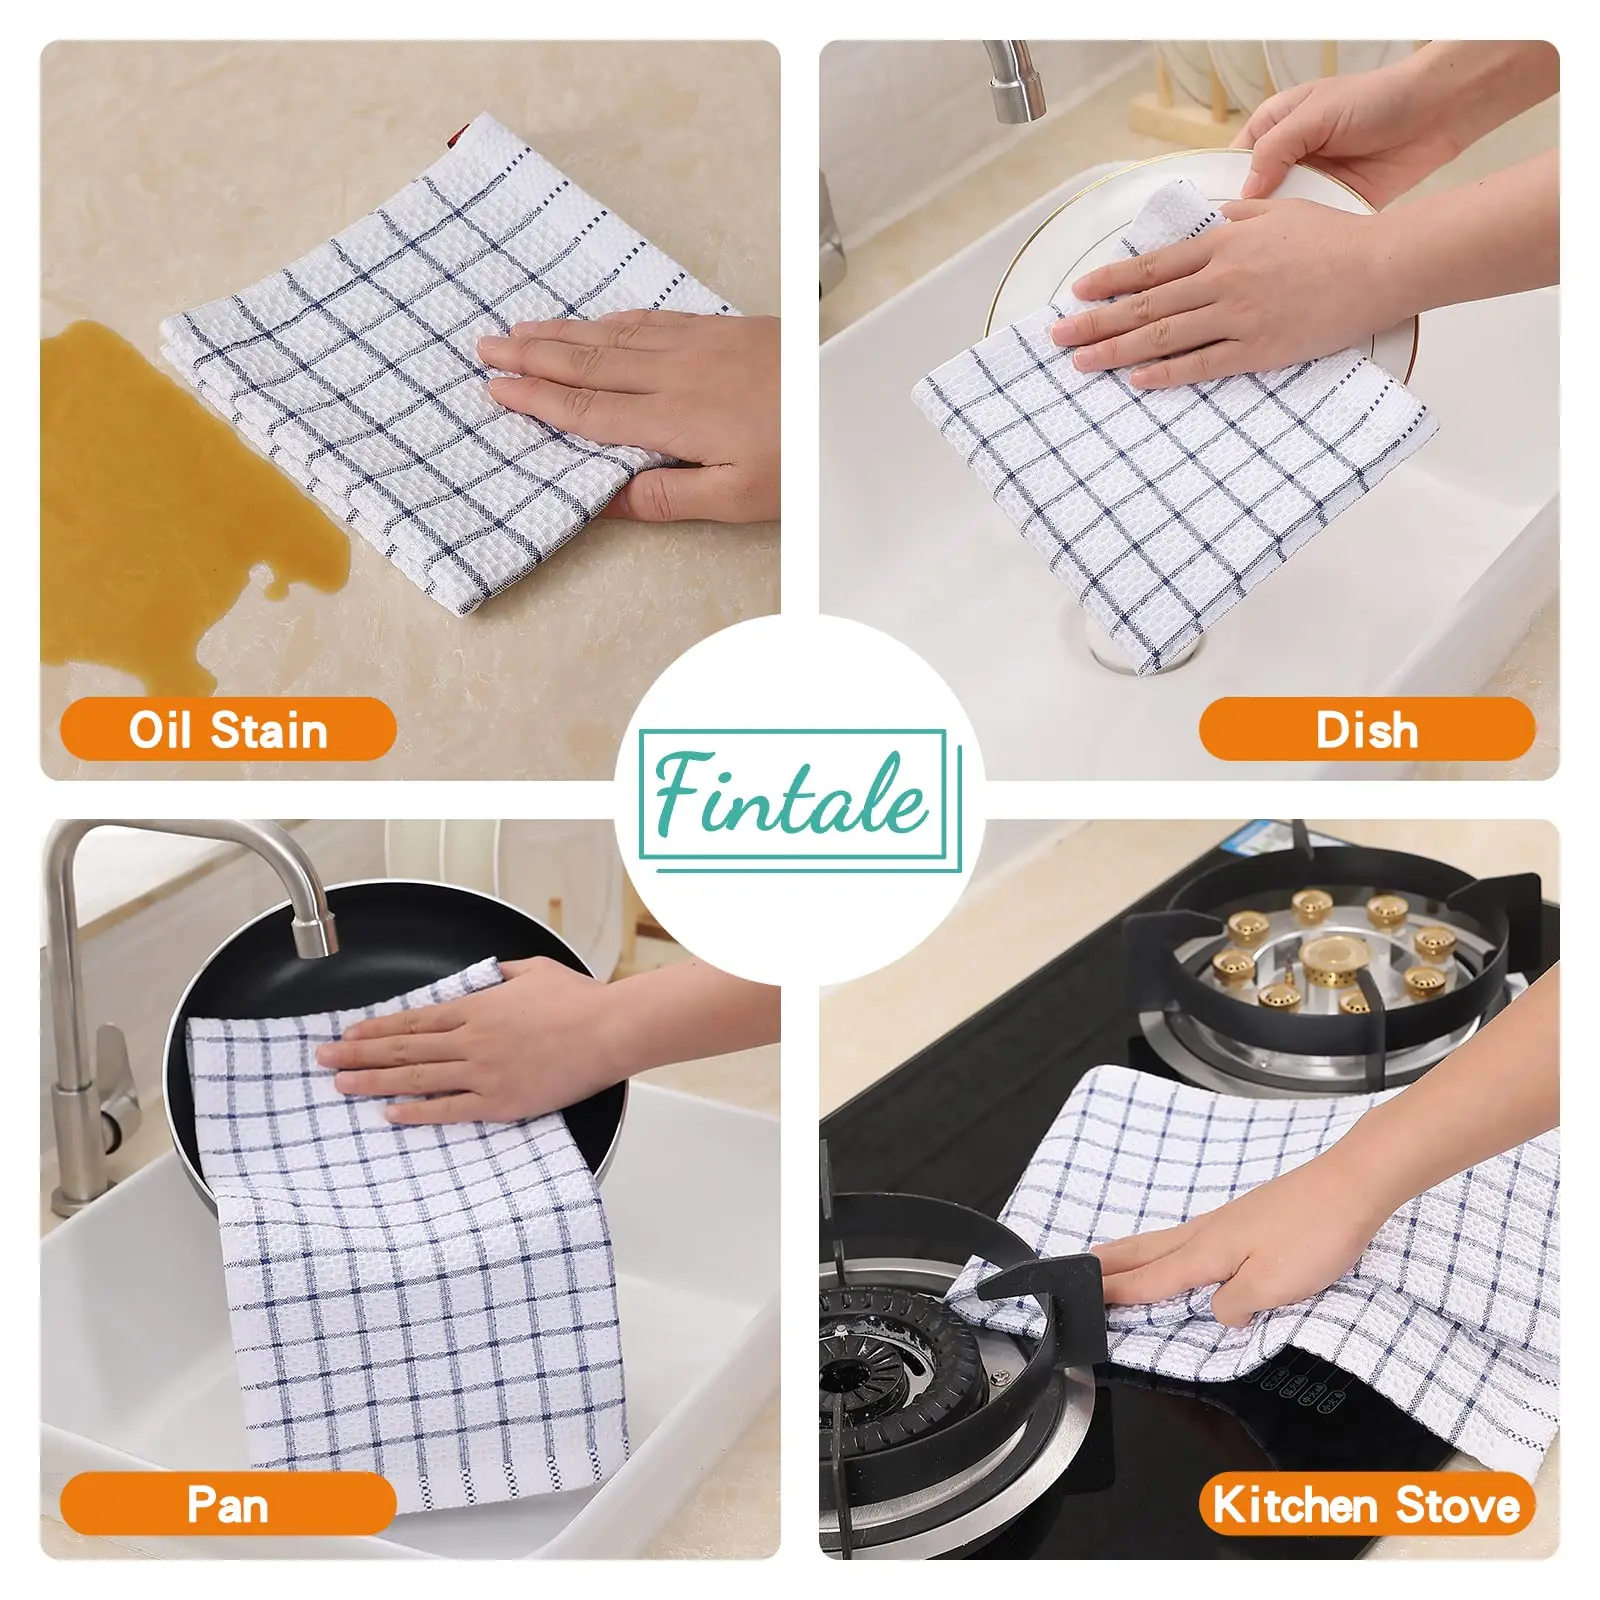 https://ae01.alicdn.com/kf/S41f87ed09ad04555b161c95498aa210eL/Cleaning-Soft-Pad-Kitchen-Super-Towel-Cloths-Washing-Rags-Homaxy-Cotton-Home-Dishes-Absorbent-100-Scouring.jpg